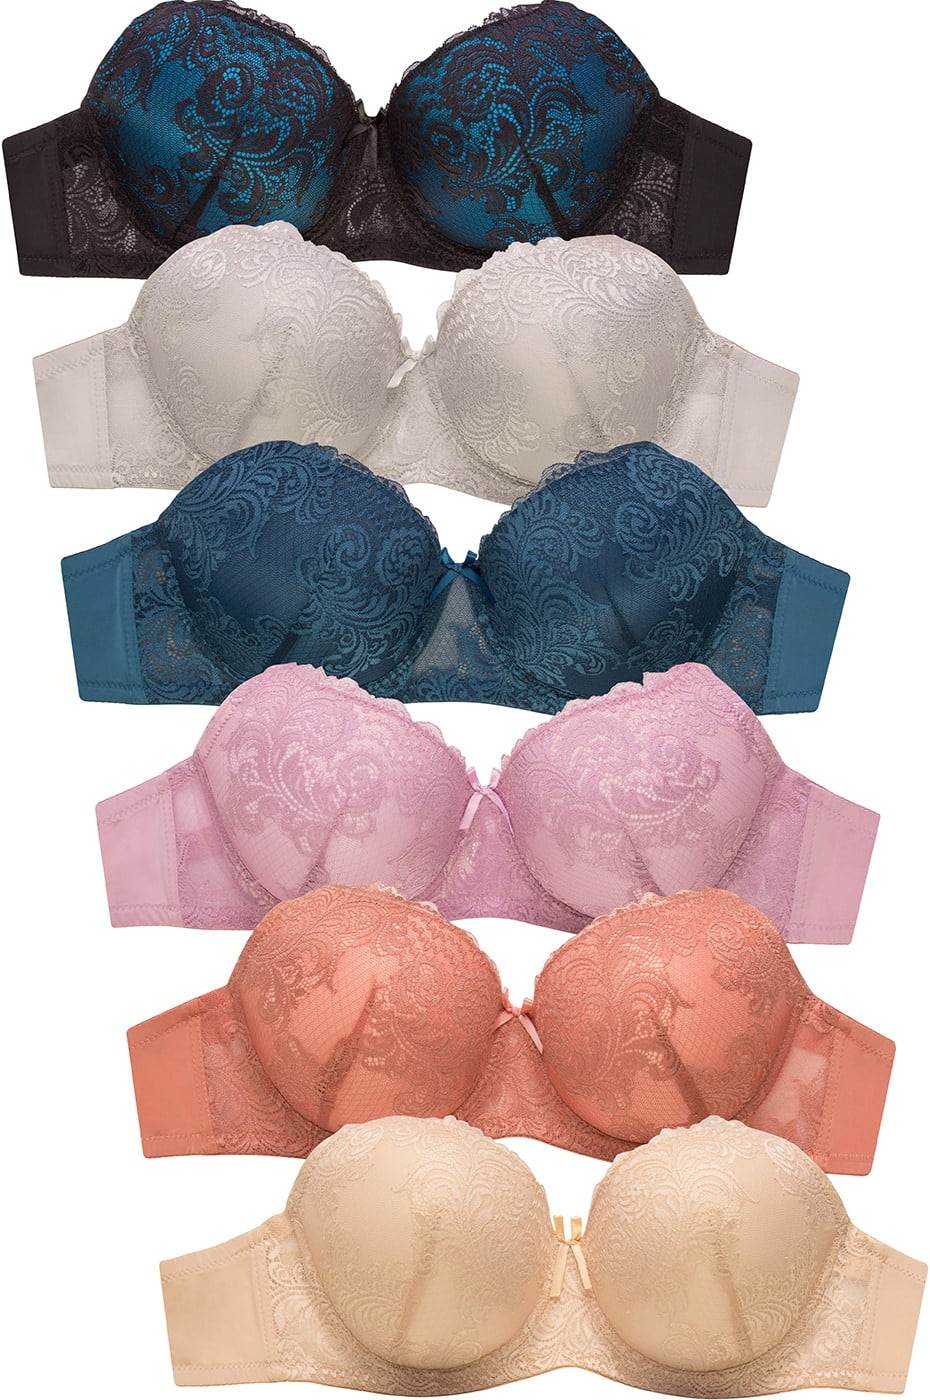 Cup D BR4161LD4 6-PACK Sofra Women's Full Cup Lace Bra Wide Straps 3 Hooks 